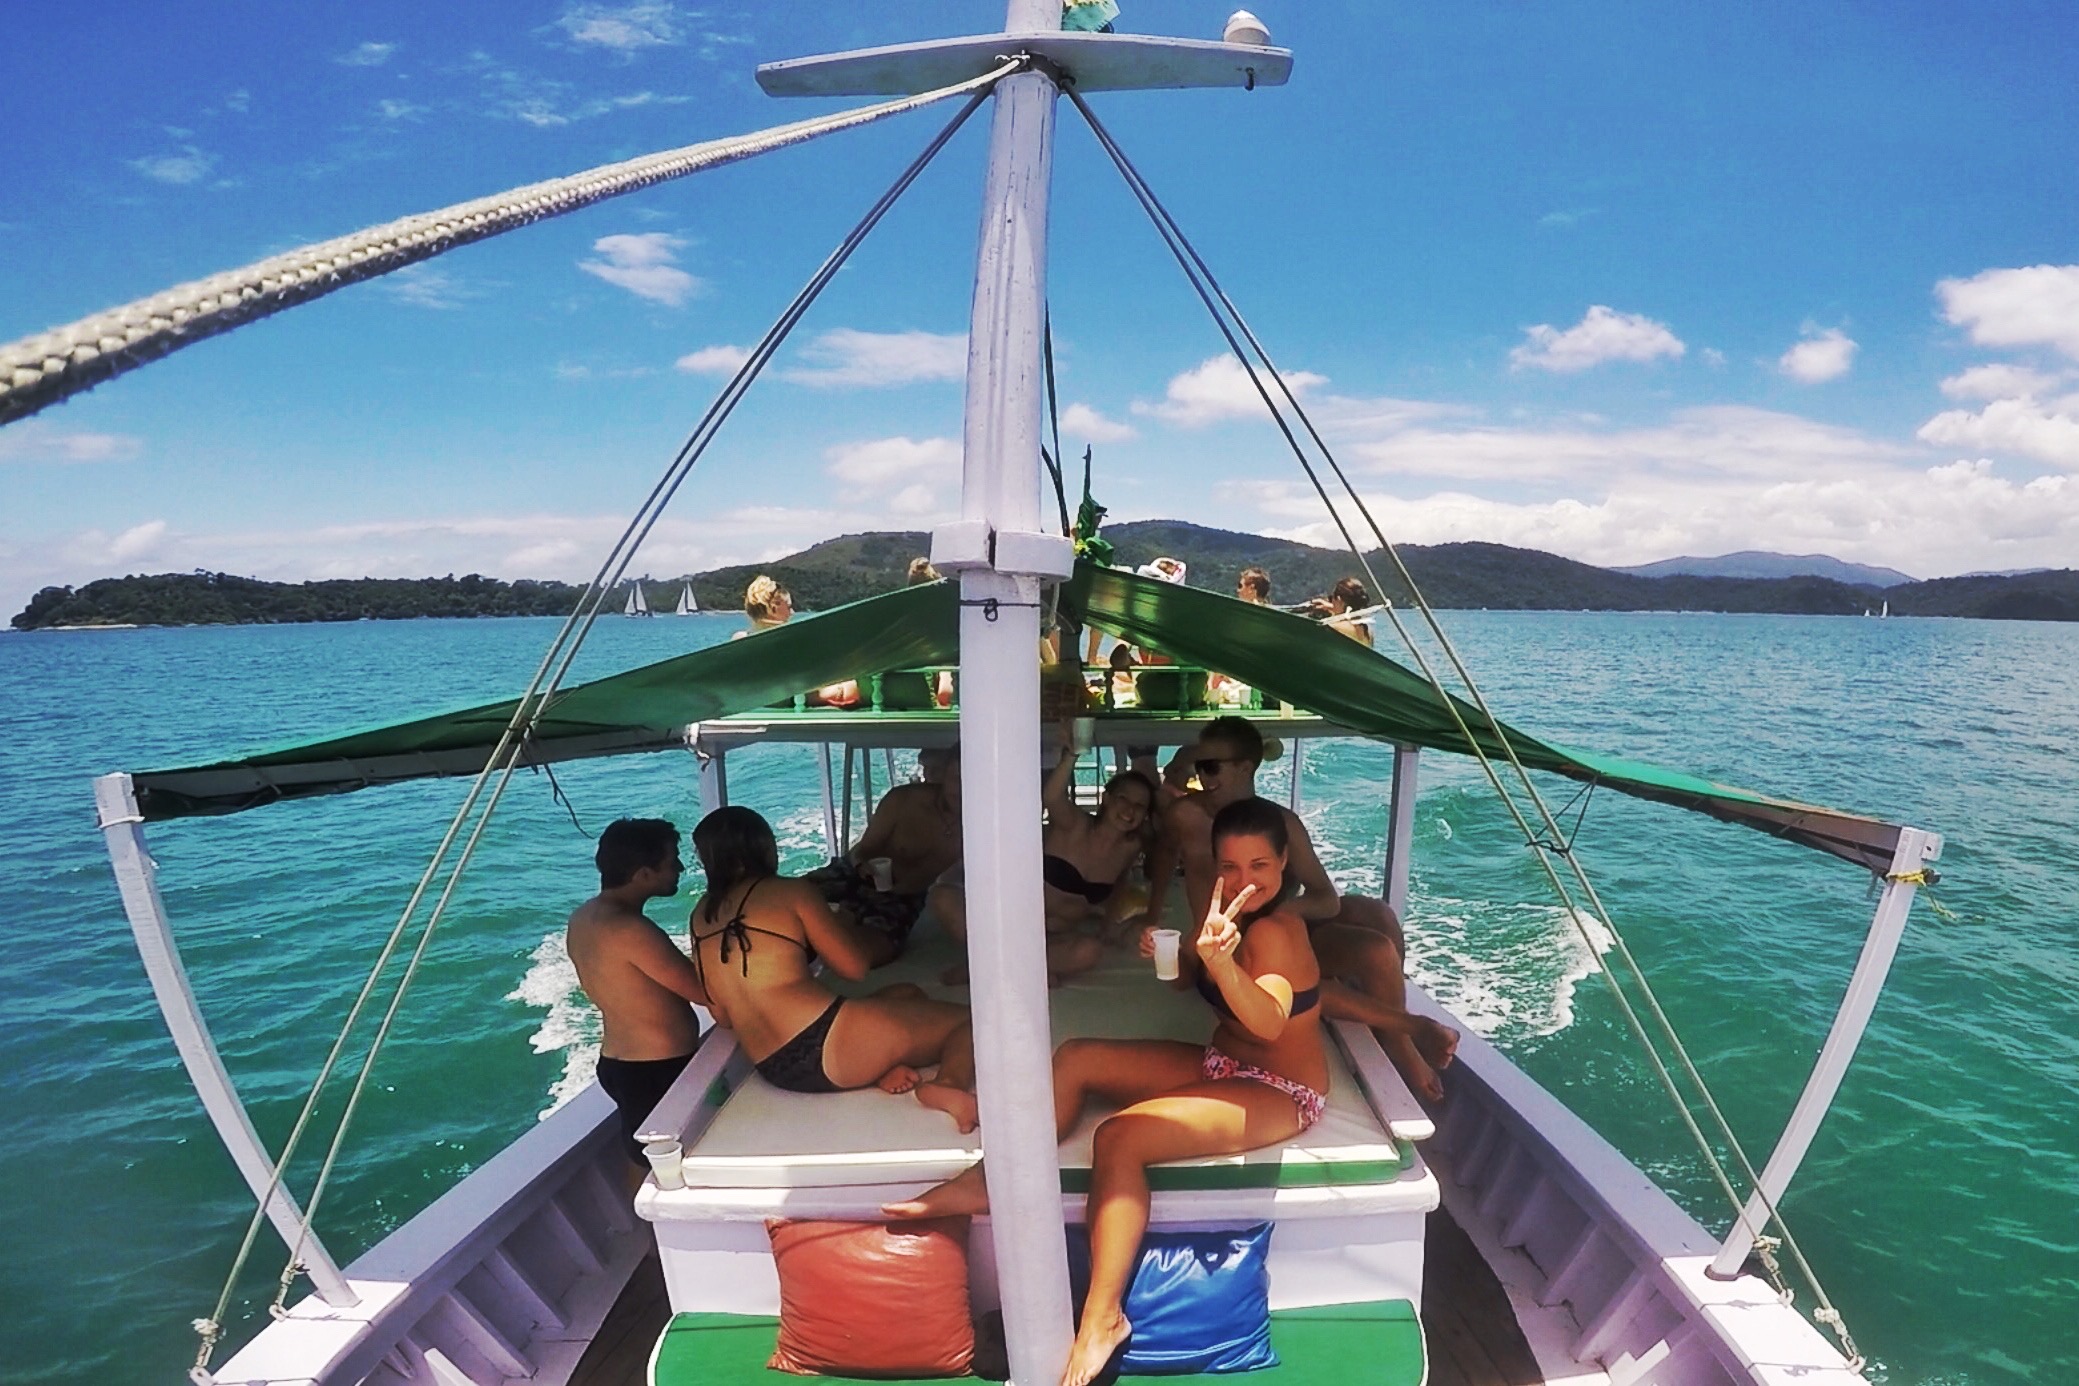 Friends onboard the party boat in Paraty, Brazil. Rockfalls, Paraty boat party and nearly losing my head